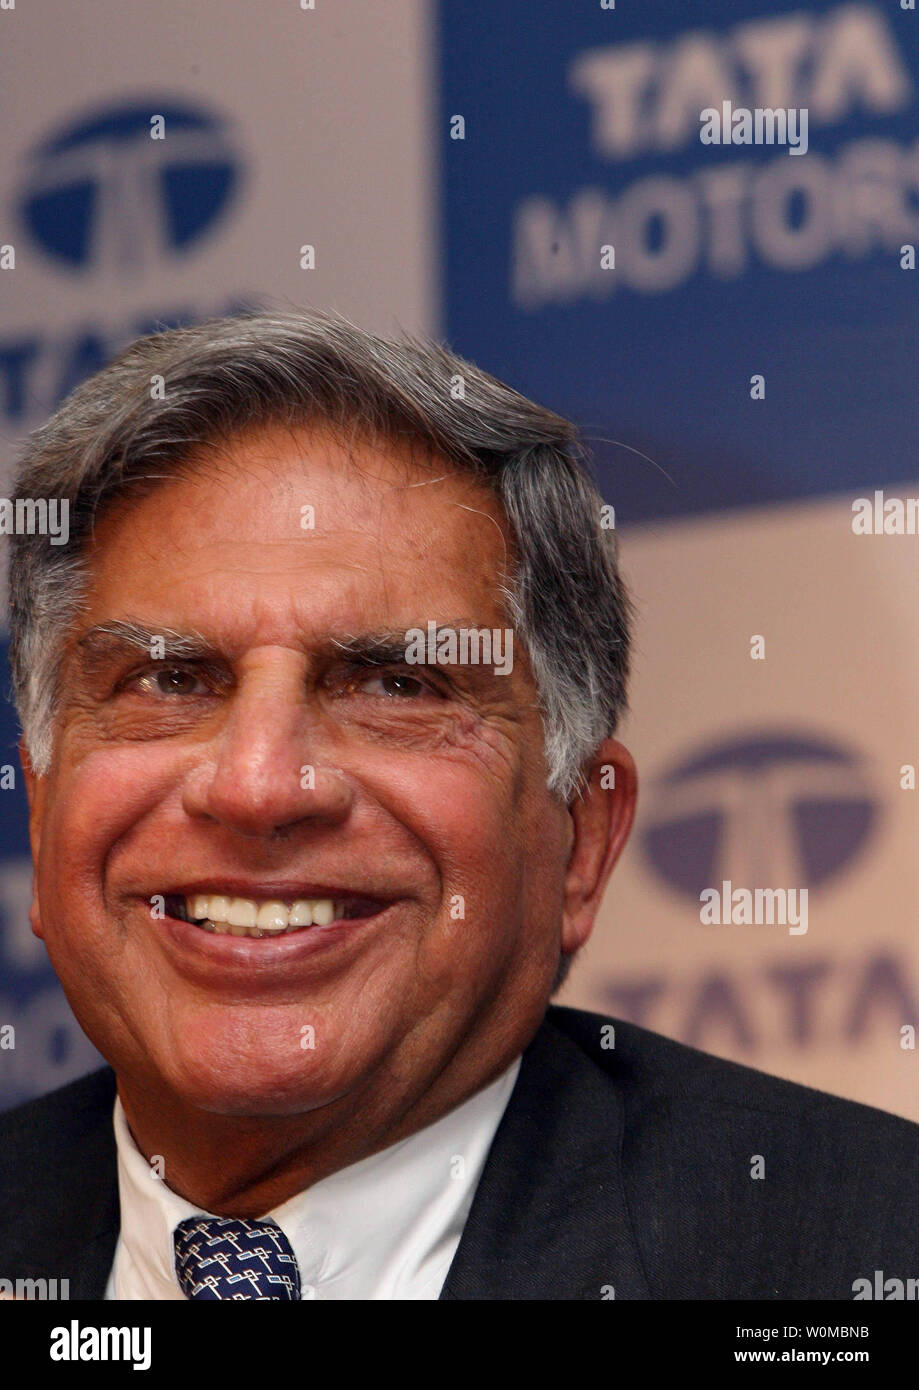 Tata Company Chairman Ratan Tata announces the newly launched Tata Nano at the 9th Auto Expo in New Delhi, India, Thursday, January 10, 2008. India's Tata Motors unveiled its much anticipated US$2,500 car, an ultracheap price tag that brings car ownership into the reach of tens of millions of people across the world. Tata claims that the Nano is the world's cheapest car.  (UPI Photo) Stock Photo